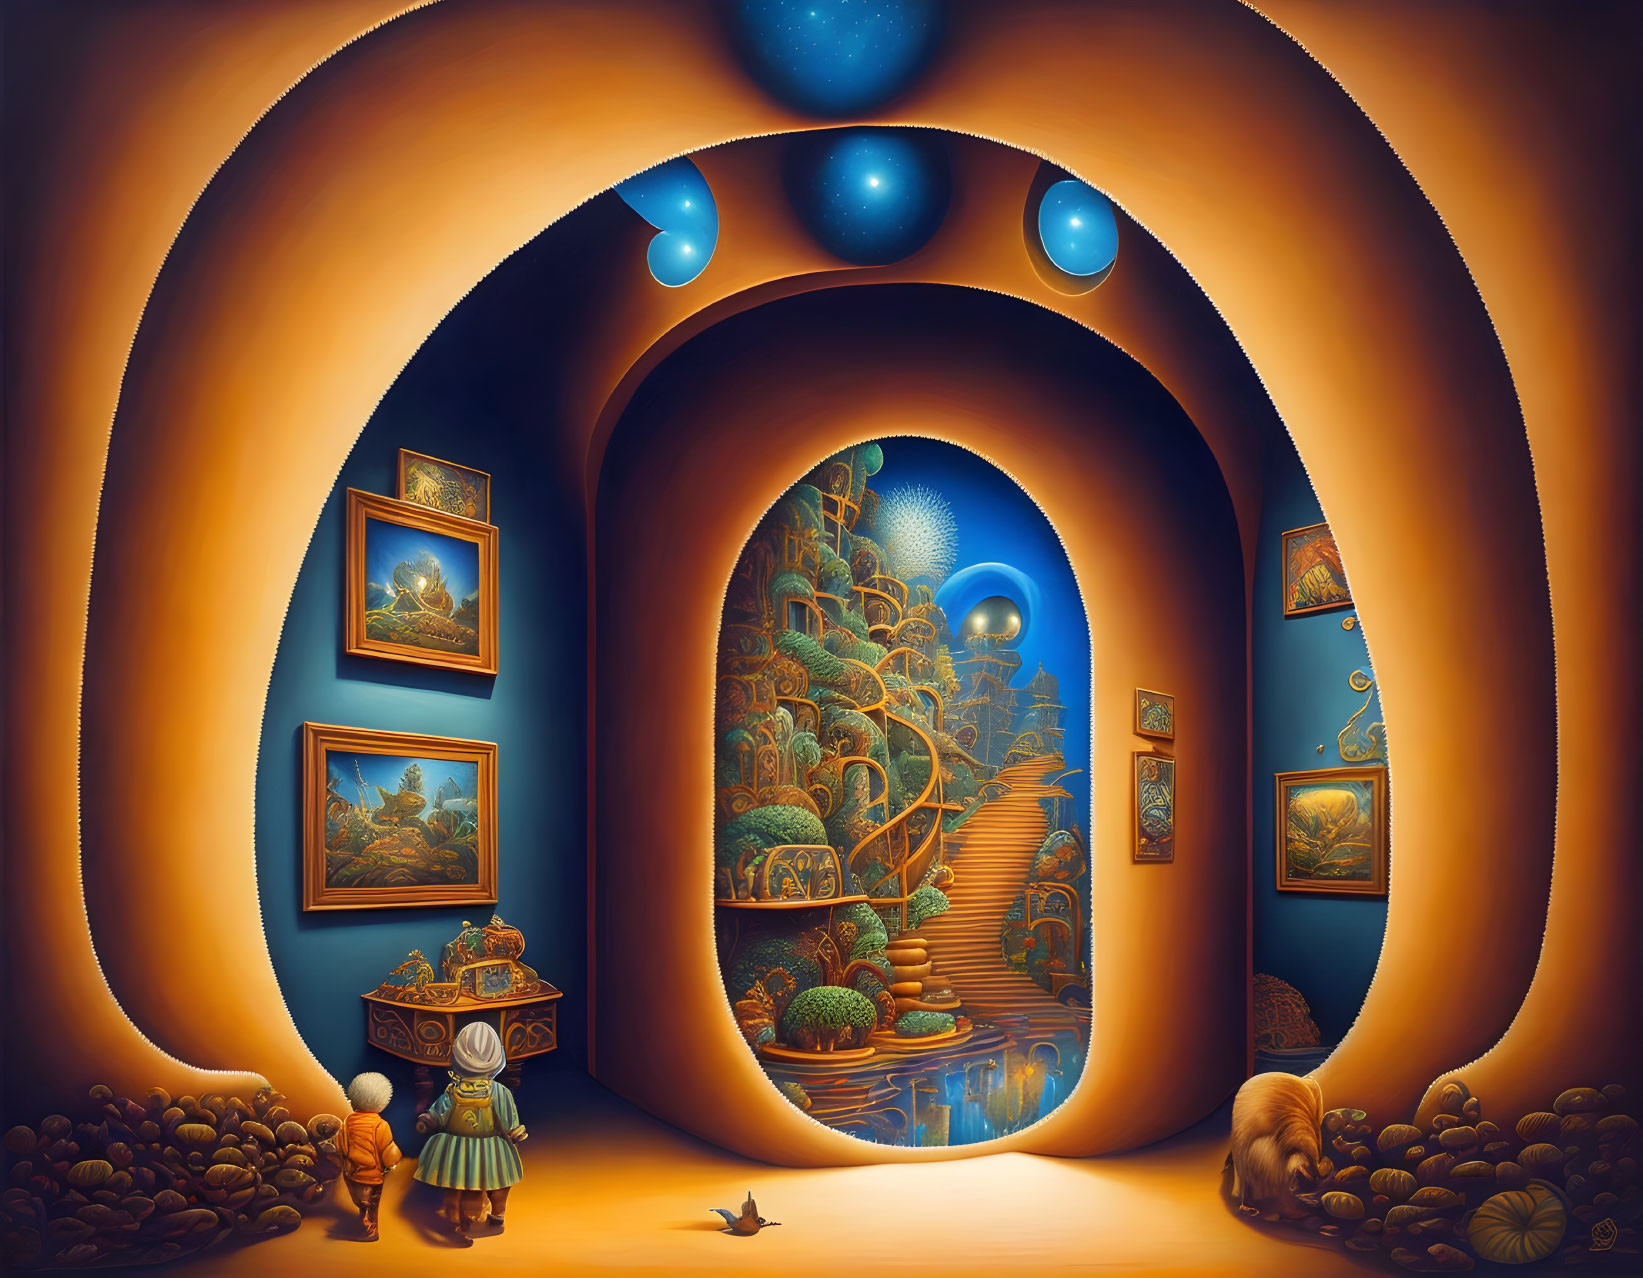 Whimsical painting featuring figures in surreal gallery